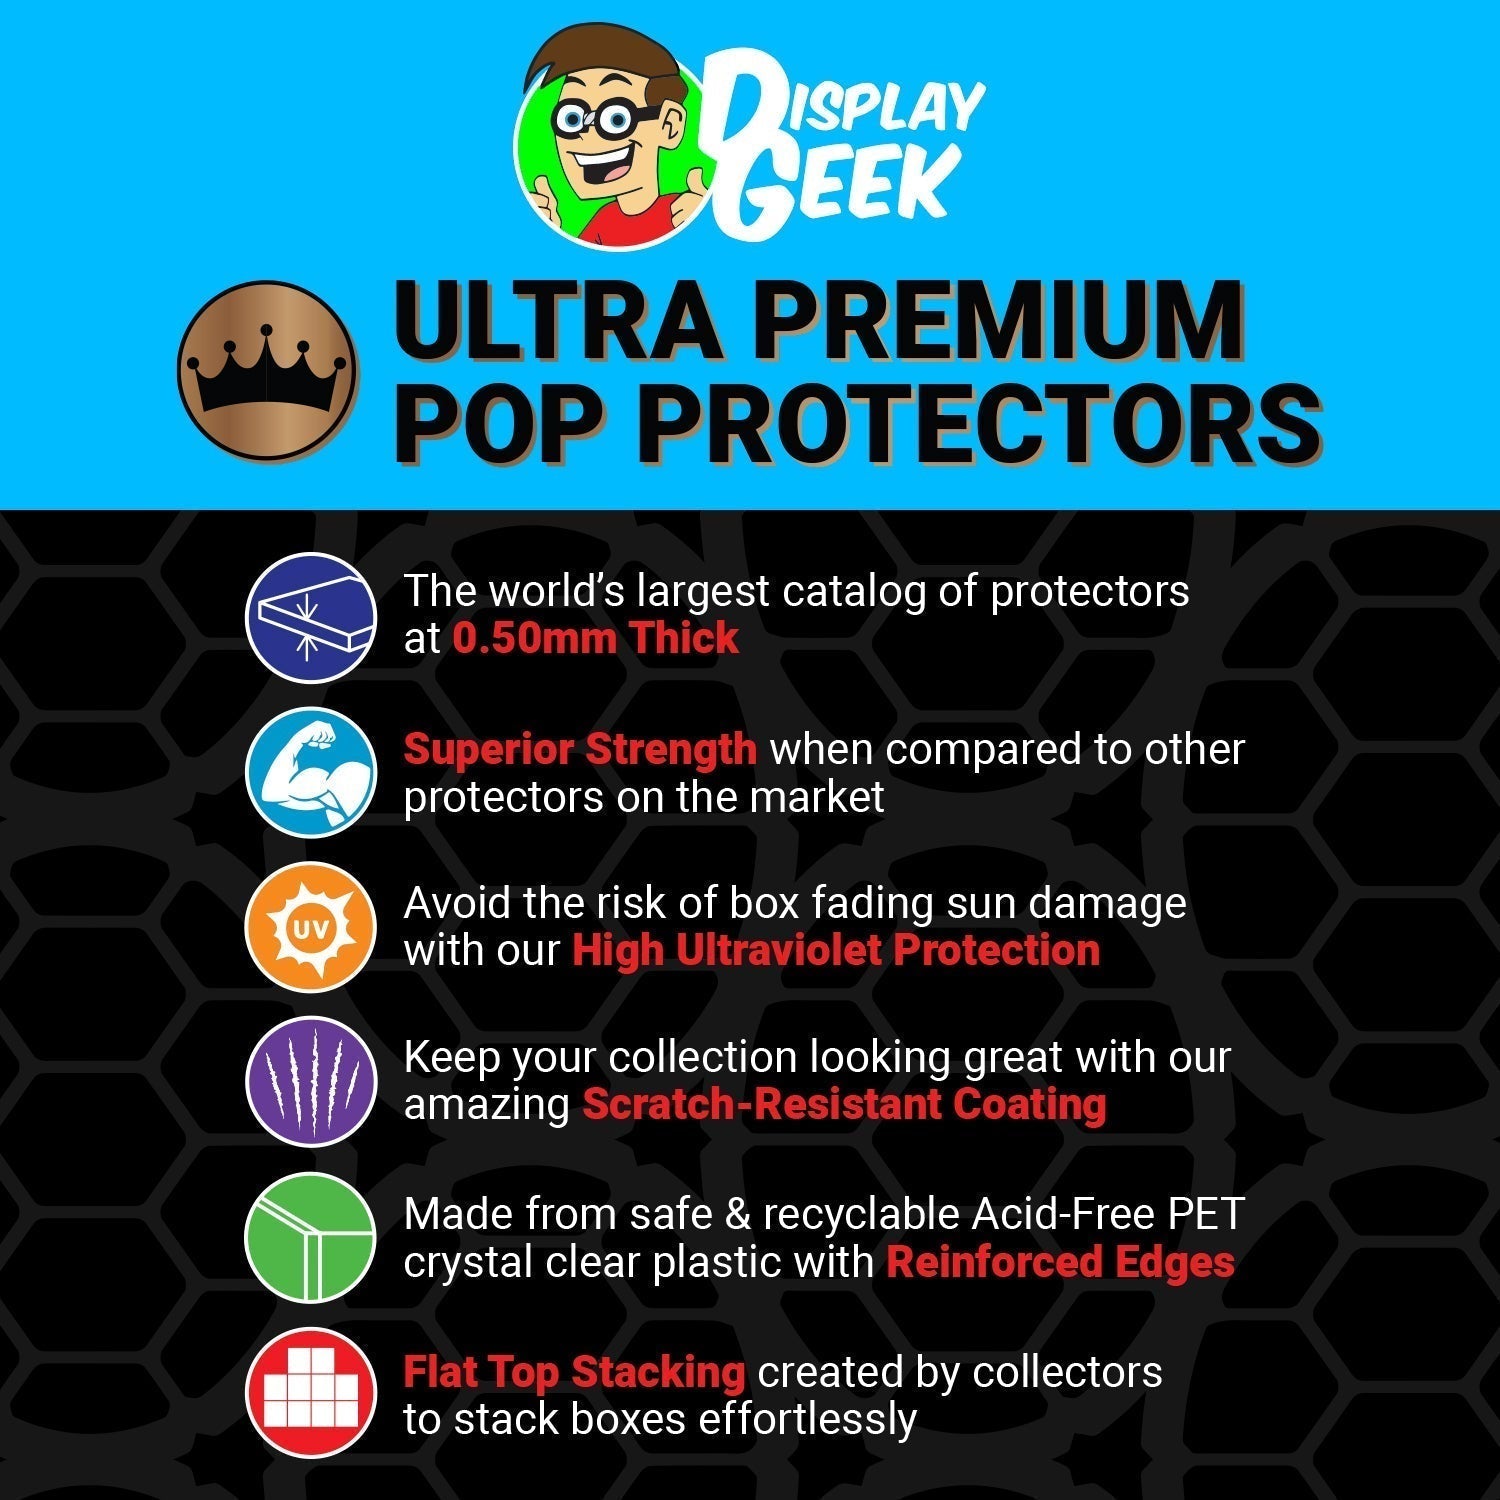 Pop Protector for 4 Pack Four Heavenly Kings Funko Pop - PPG Pop Protector Guide Search Created by Display Geek